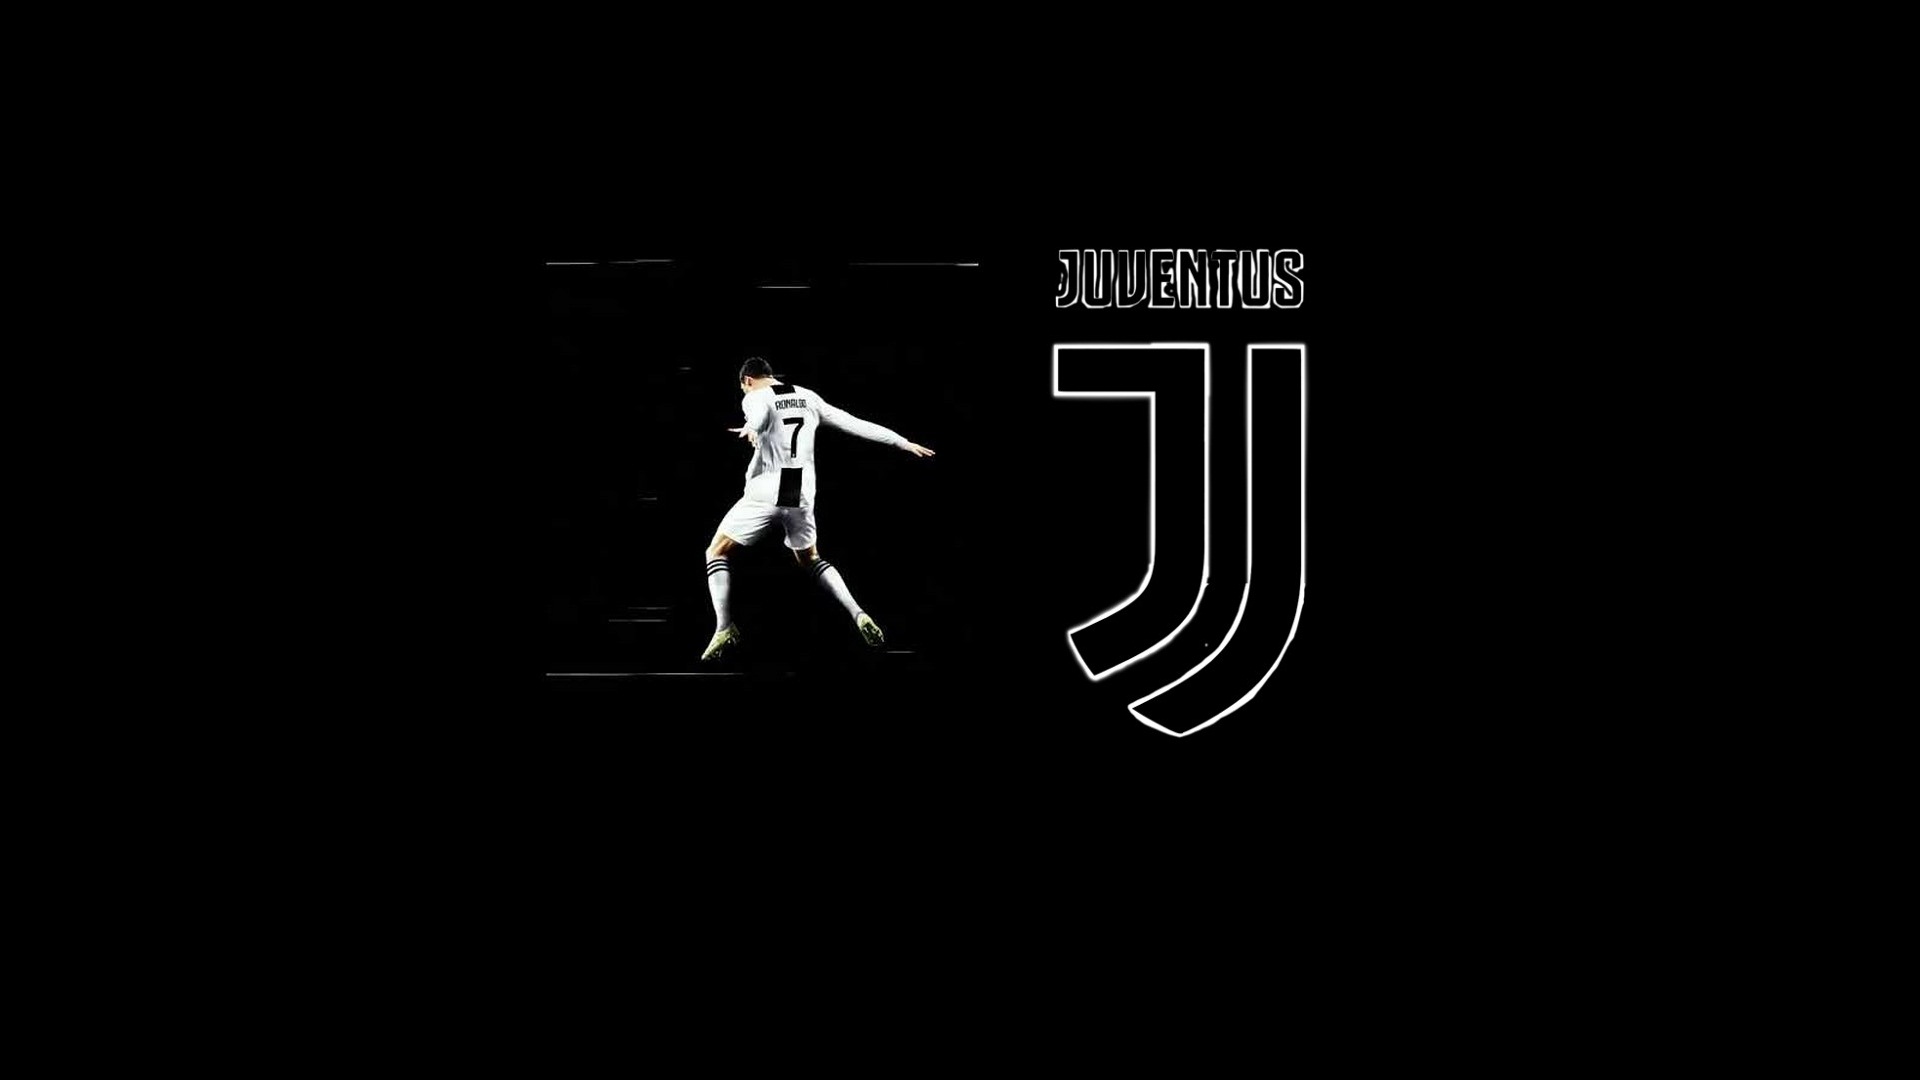 CR7 Juventus Desktop Wallpapers With Resolution 1920X1080 pixel. You can make this wallpaper for your Mac or Windows Desktop Background, iPhone, Android or Tablet and another Smartphone device for free